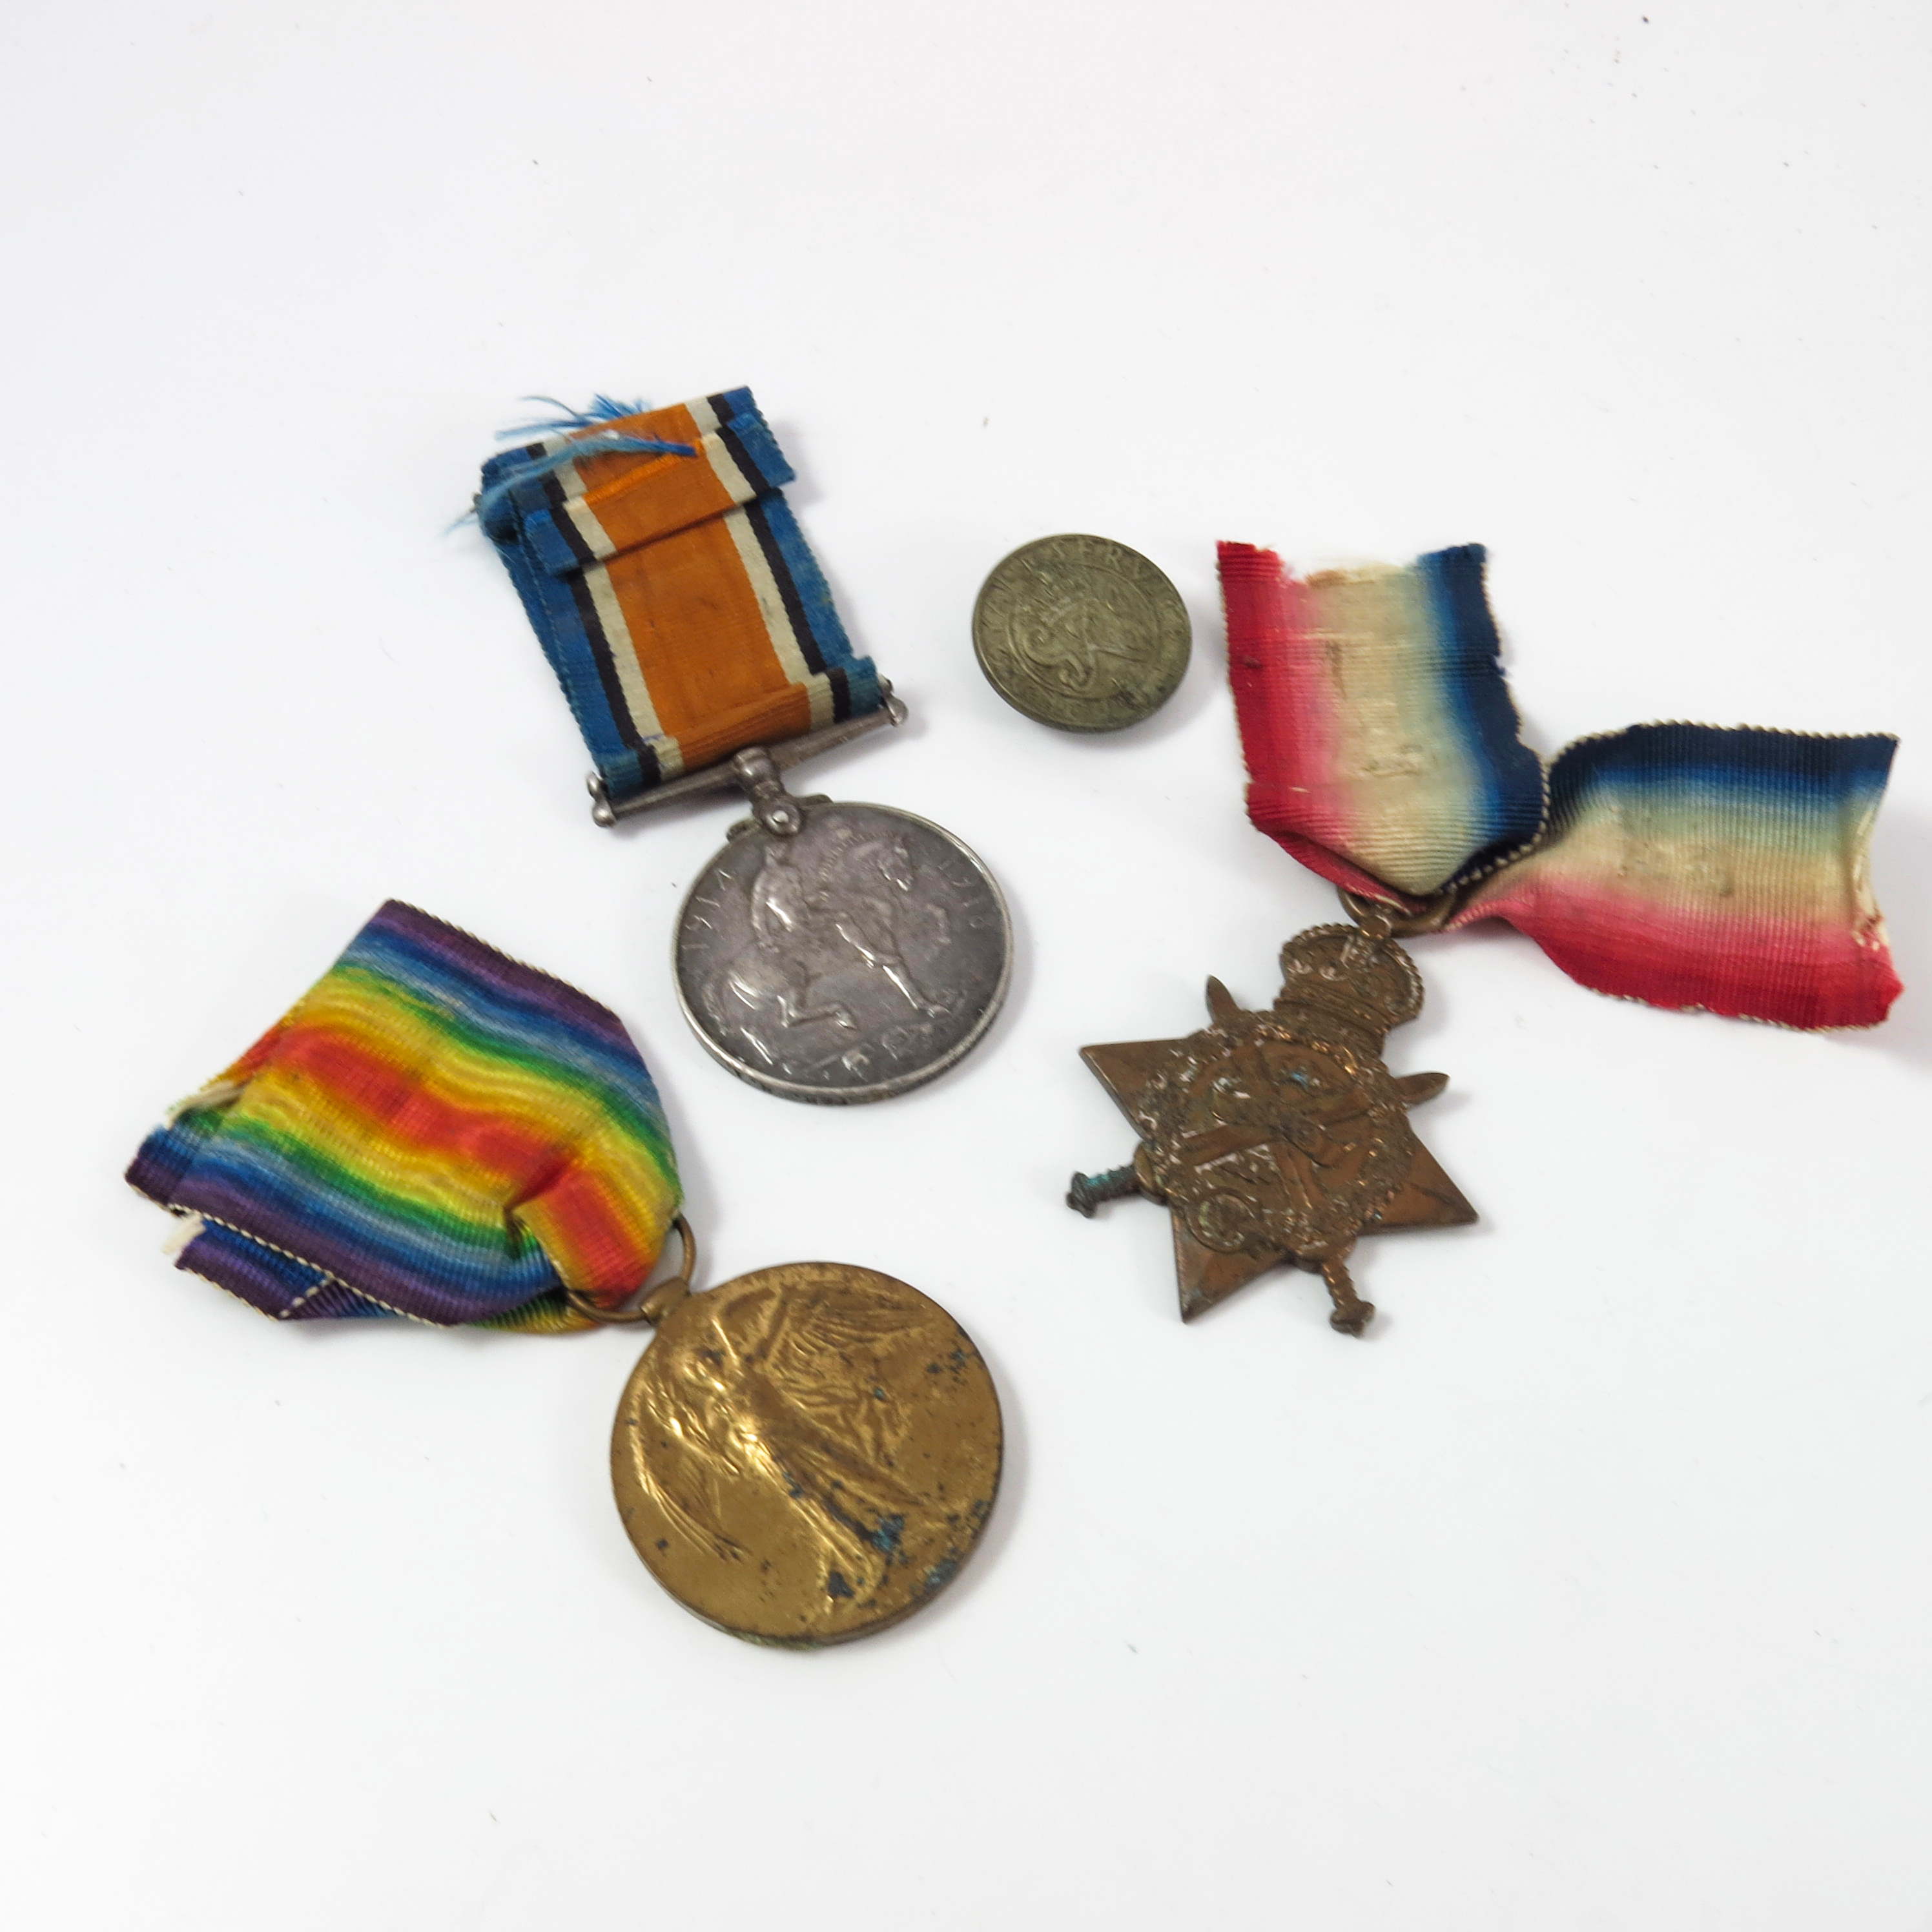 WWI 1914-18 WAR MEDAL AND VICTORY MEDAL, 1914-15 STAR, LOYAL SERVICE BADGE 28251 DRV. W. R.